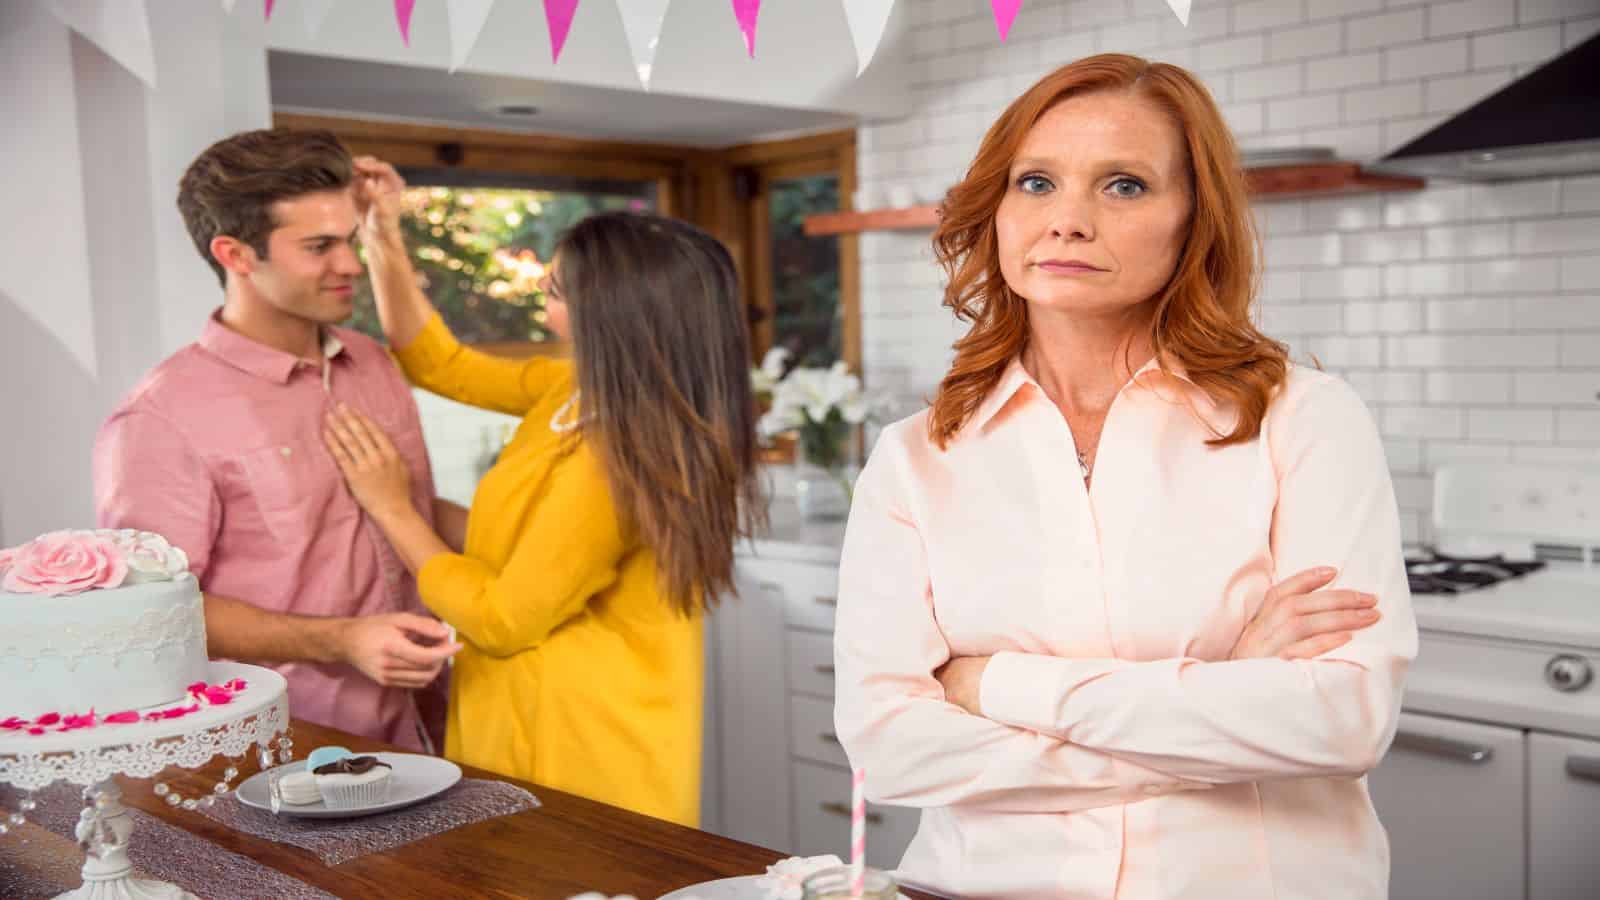 Family Therapist Explains 10 Ways to Win Over Your In-Laws